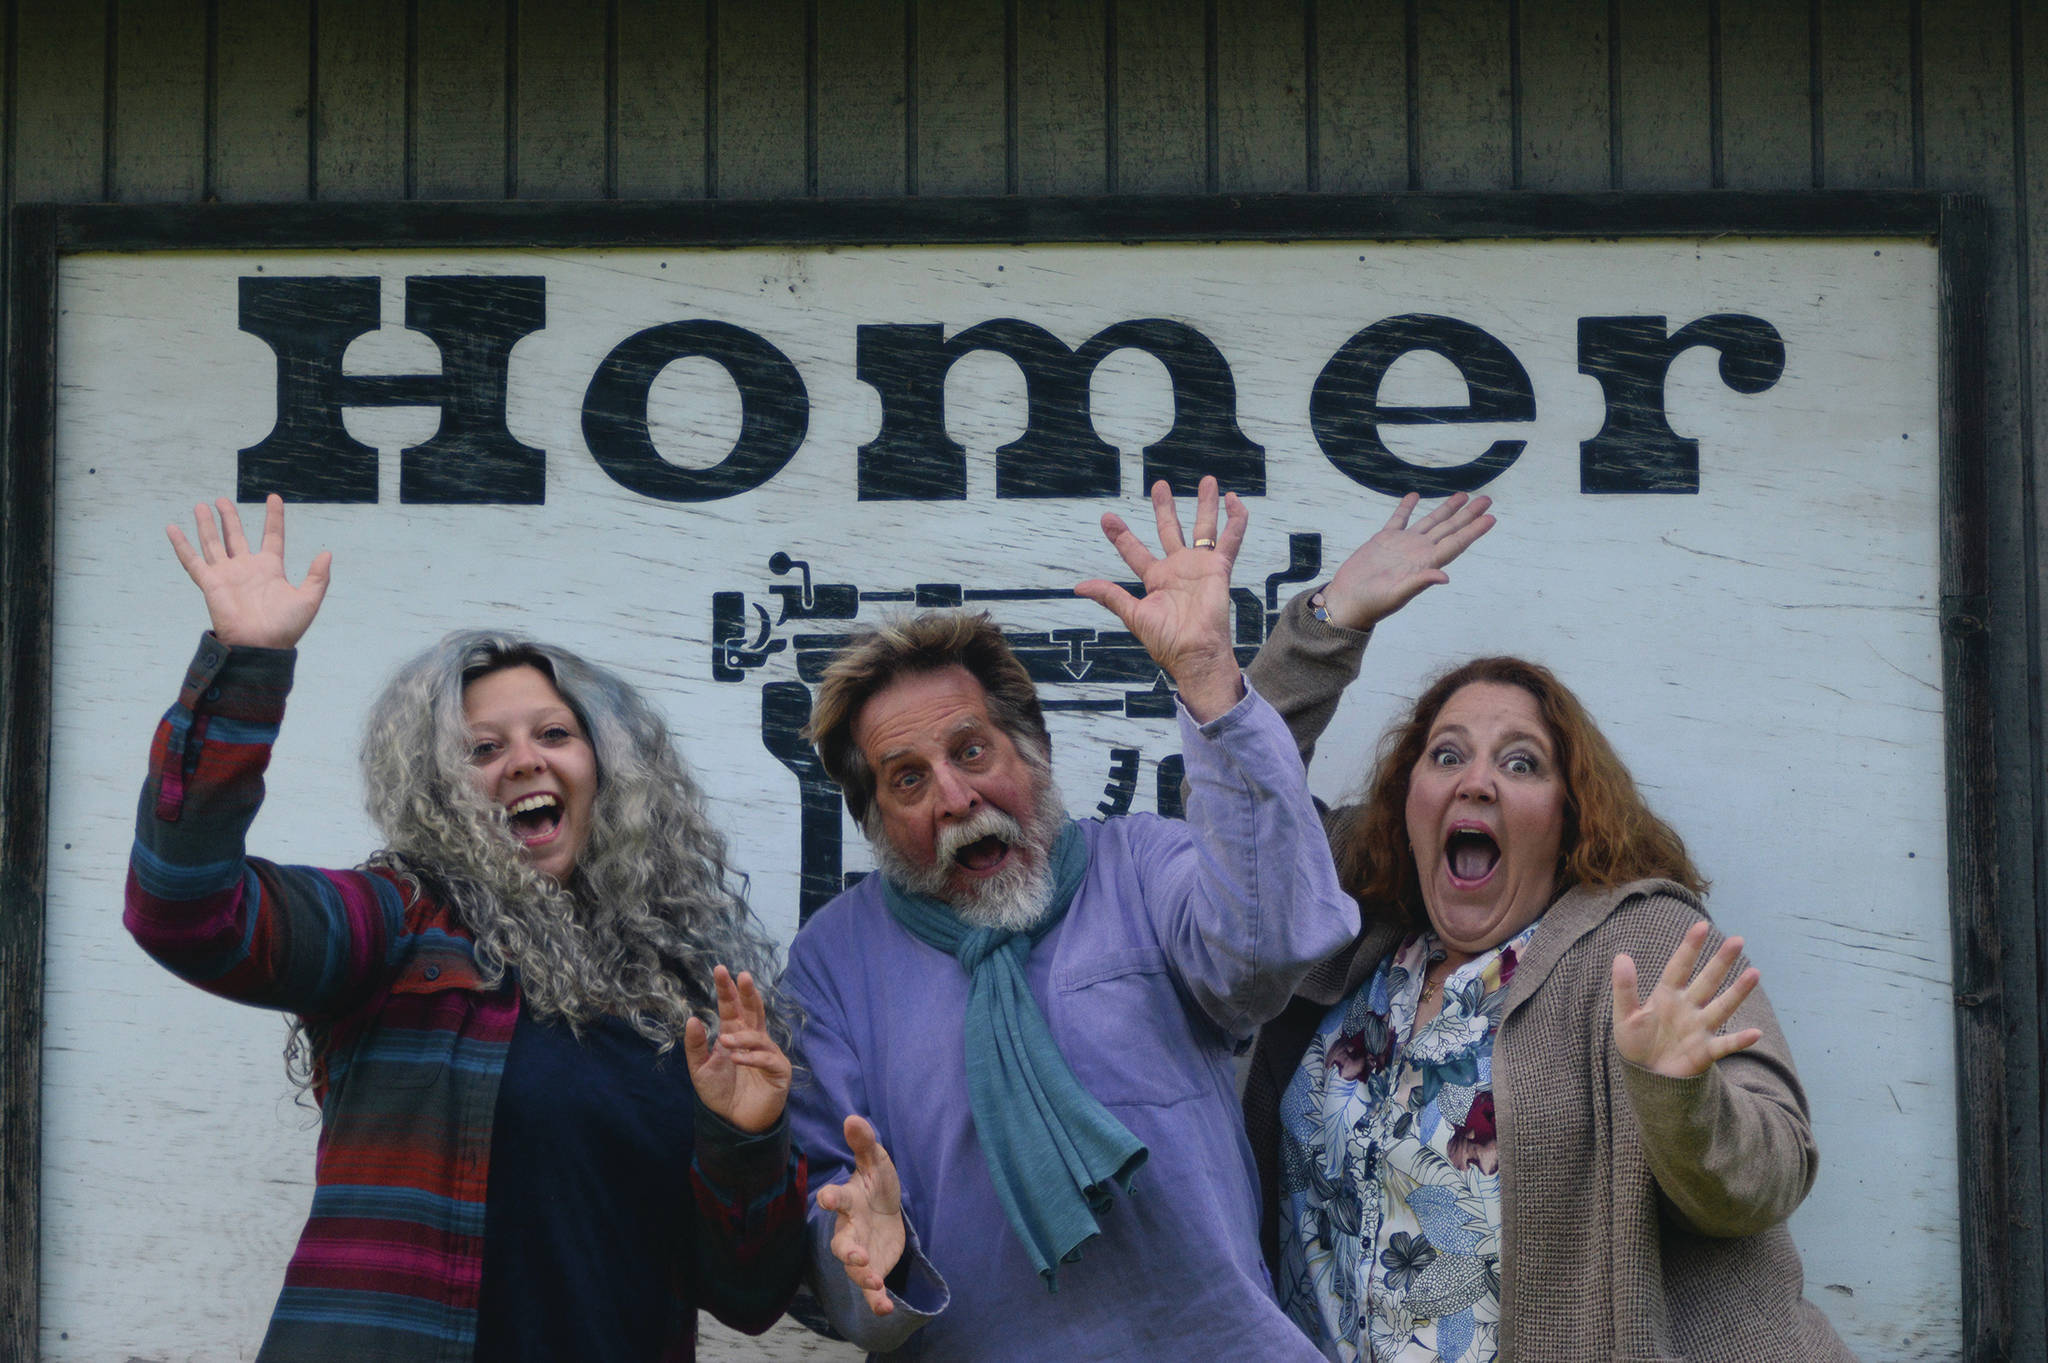 The author (left) enjoys taking a corporate photo with Editor Michael Armstrong (center) and advertising rep Malia Anderson (right) at the Homer News office in Homer, Alaska. (Photo by Michael Armstrong/Homer News)